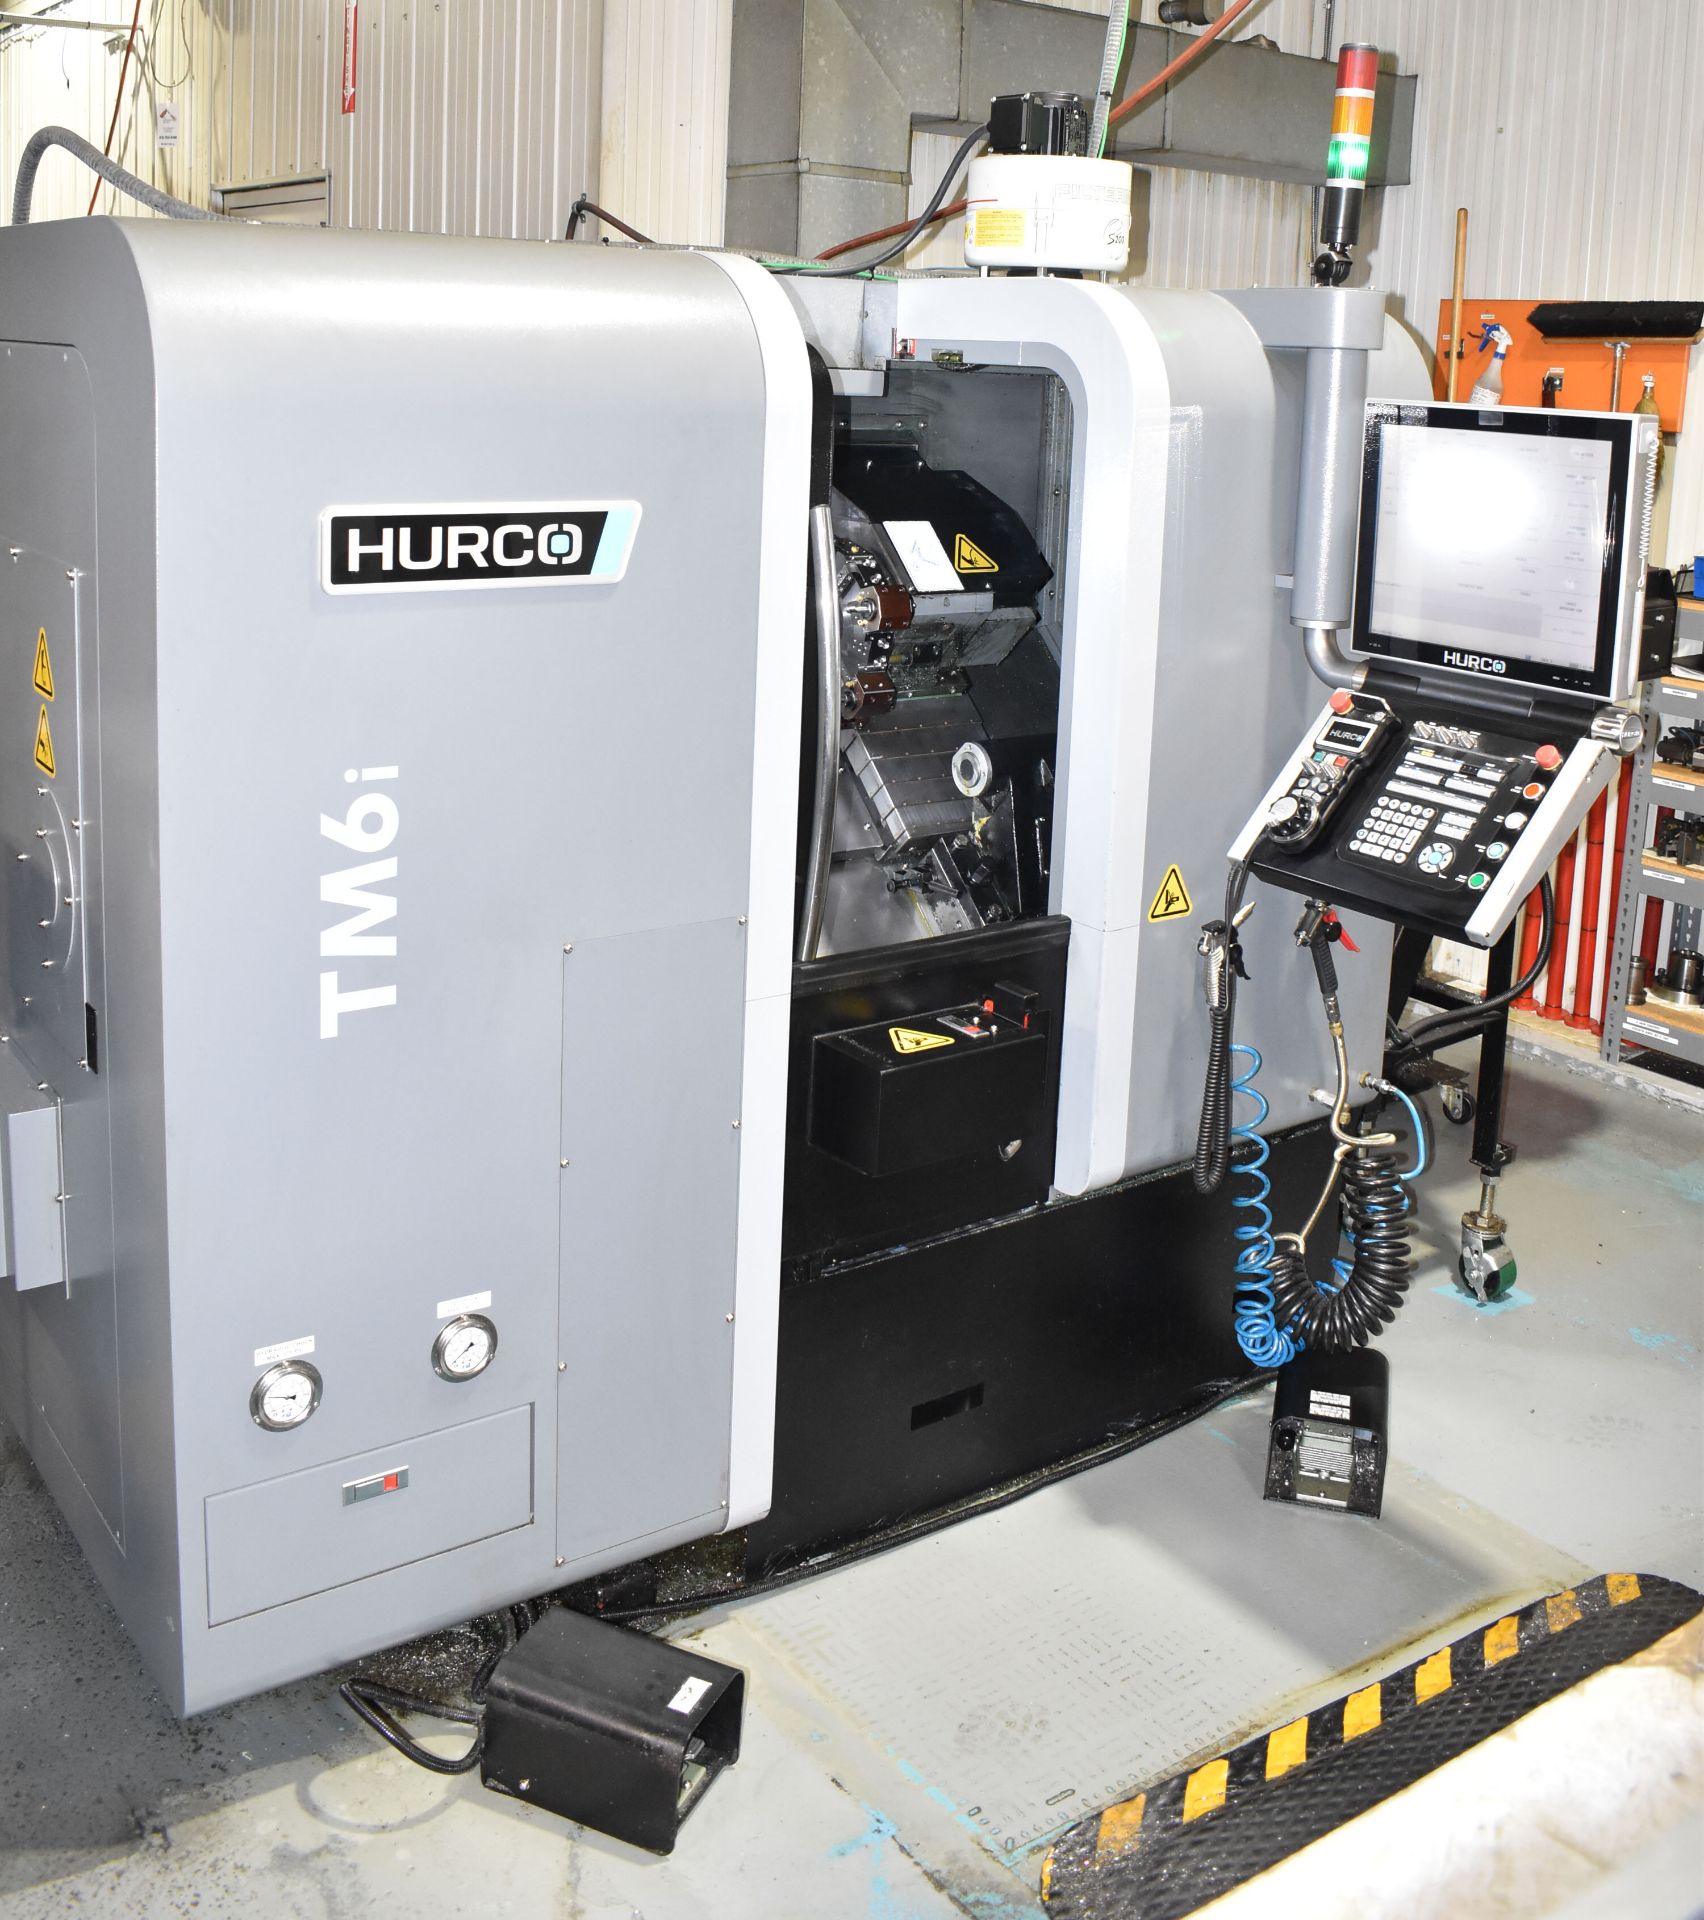 HURCO (2018) TM6I CNC TURNING CENTER WITH HURCO CNC CONTROL, 15.94" SWING OVER BED, 15.80"